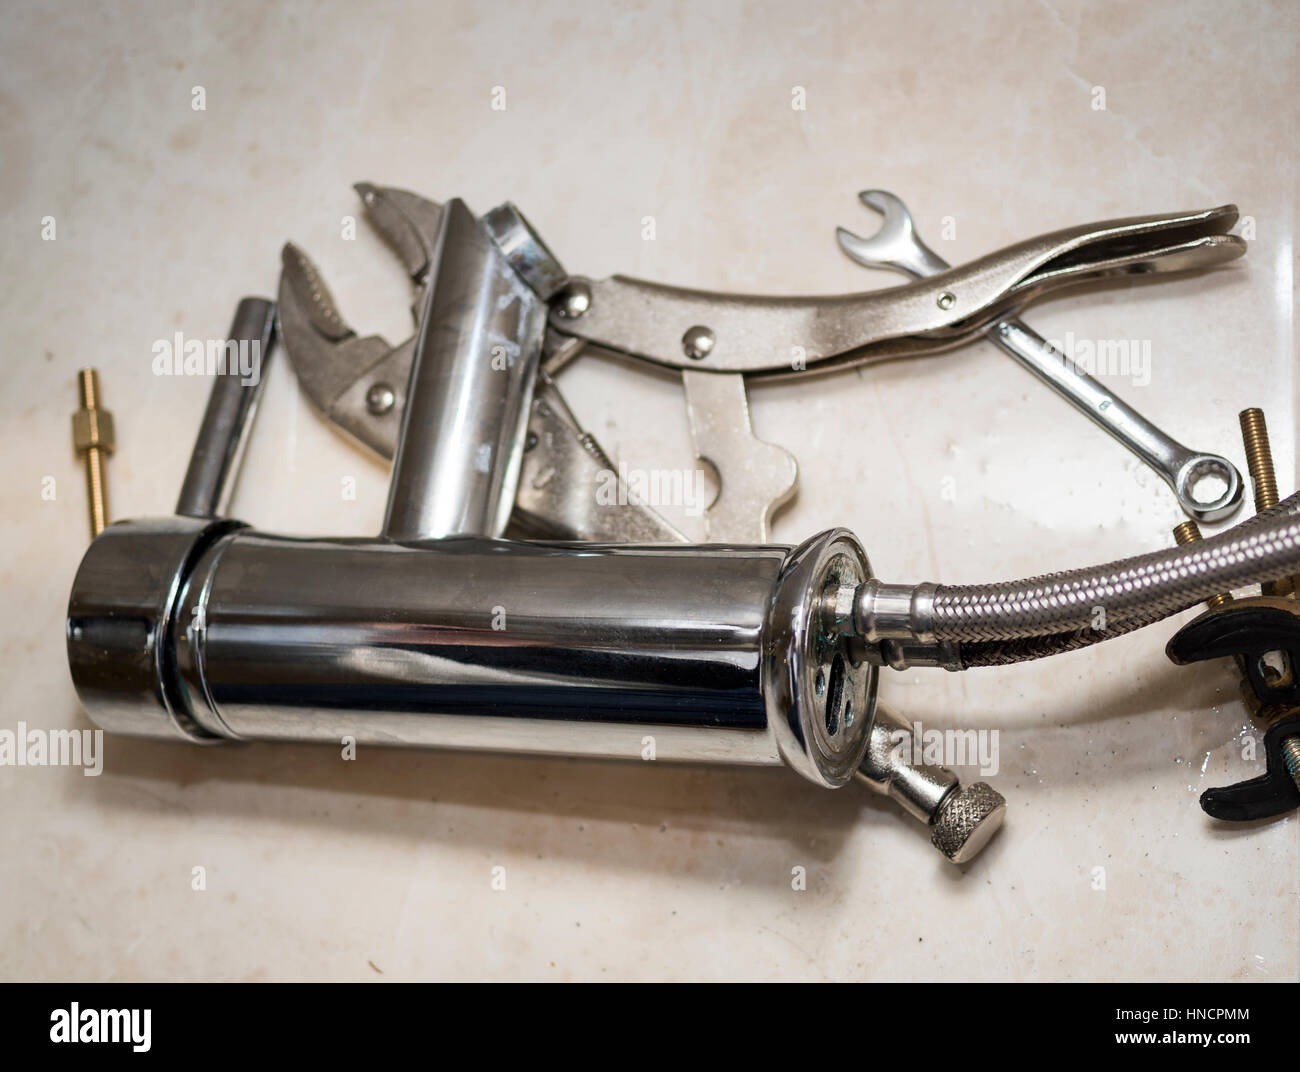 Pile of metal tools and a tap to illustrate DIY (Do It Yourself) plumbing at home Stock Photo